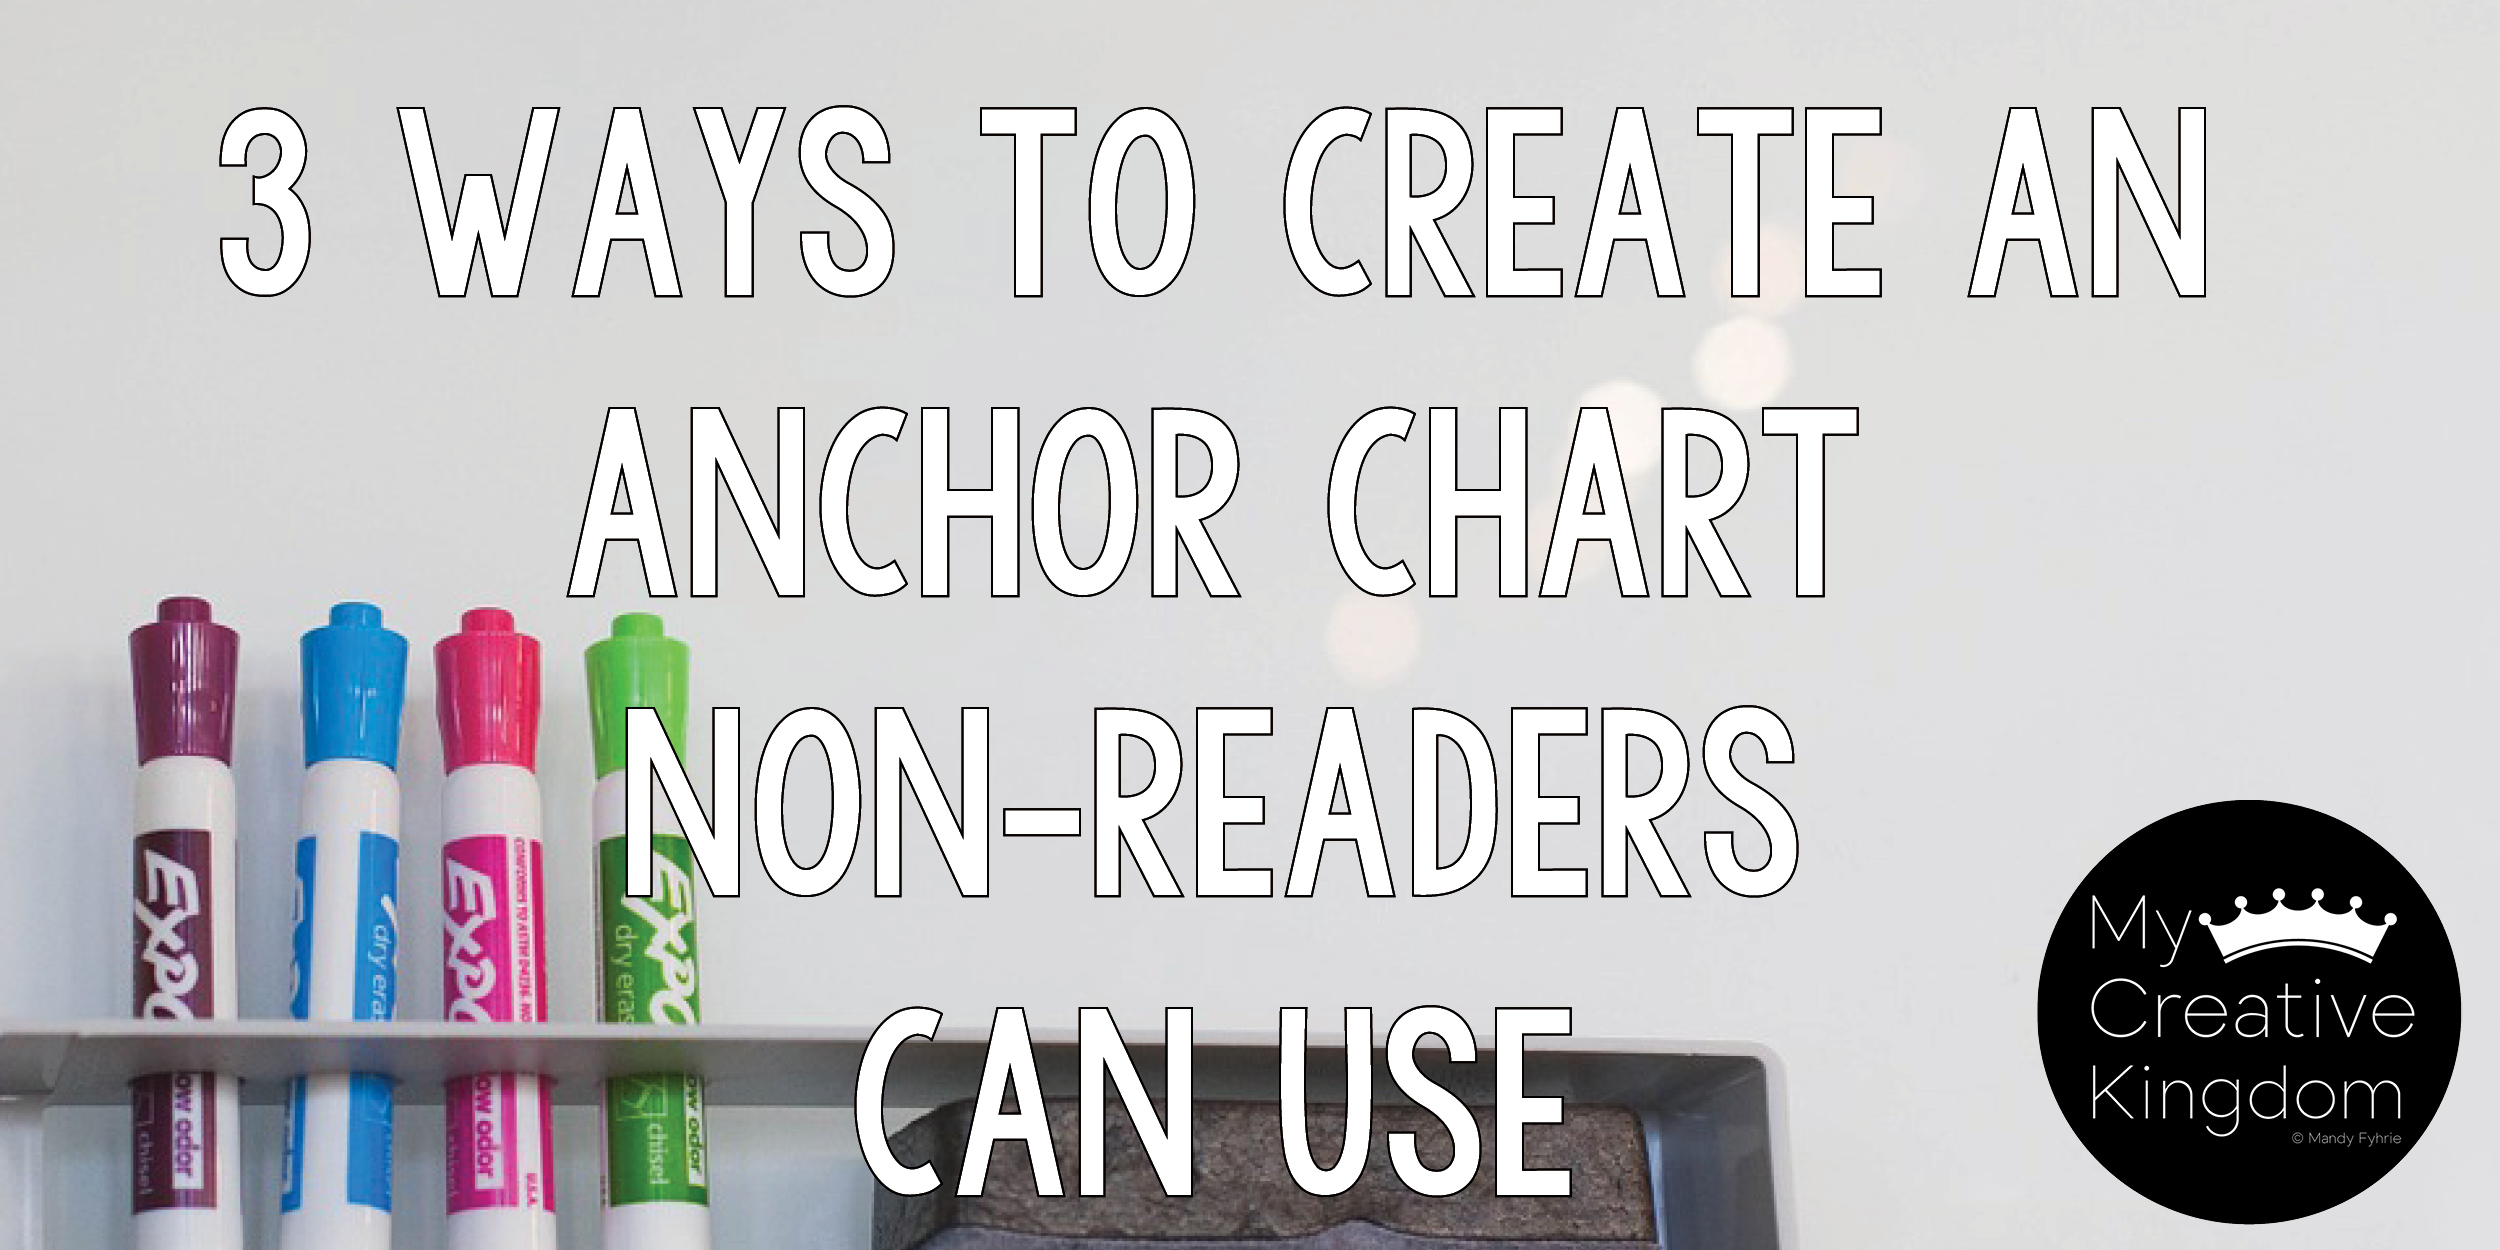 3 Ways to Create an Anchor Chart Non-Readers can Use